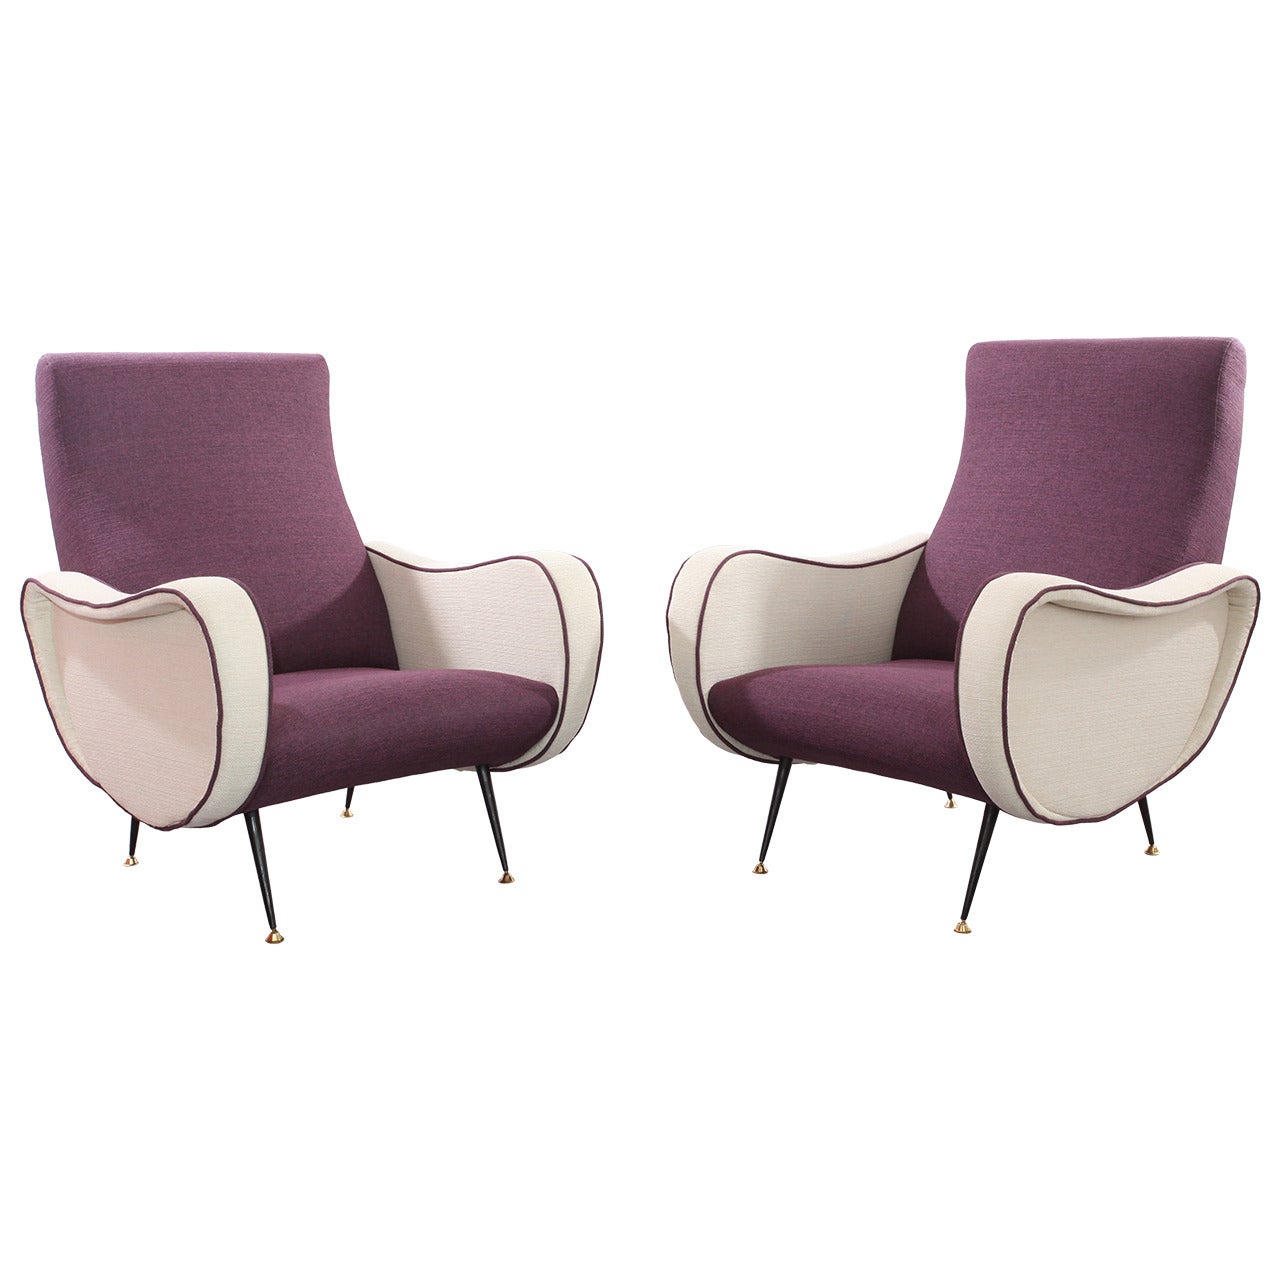 Pair of Armchairs Model "Ladychair" in the Style of Marco Zanuso, Italy 1950